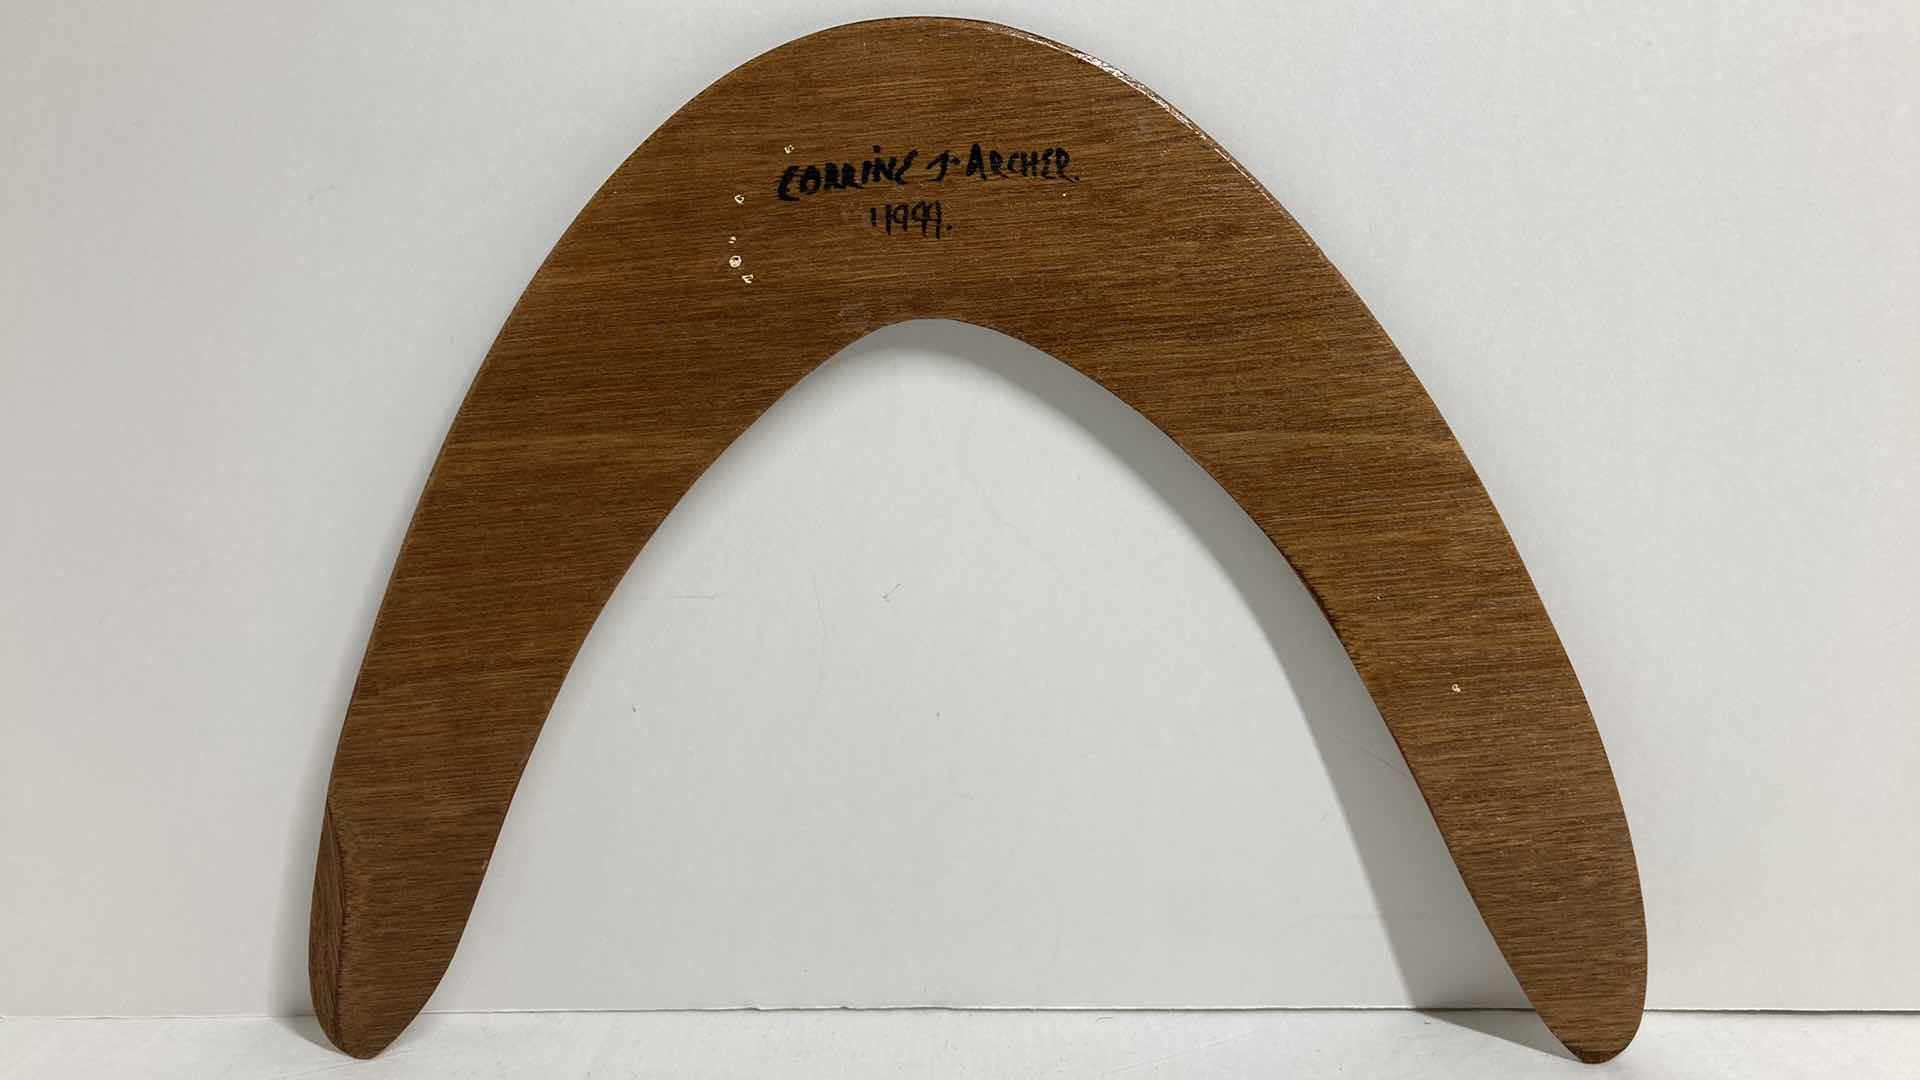 Photo 2 of WOODEN HAND PAINTED BOOMERANG BY CORRINE J. ARCHER 1999 12.75” X 9.75”